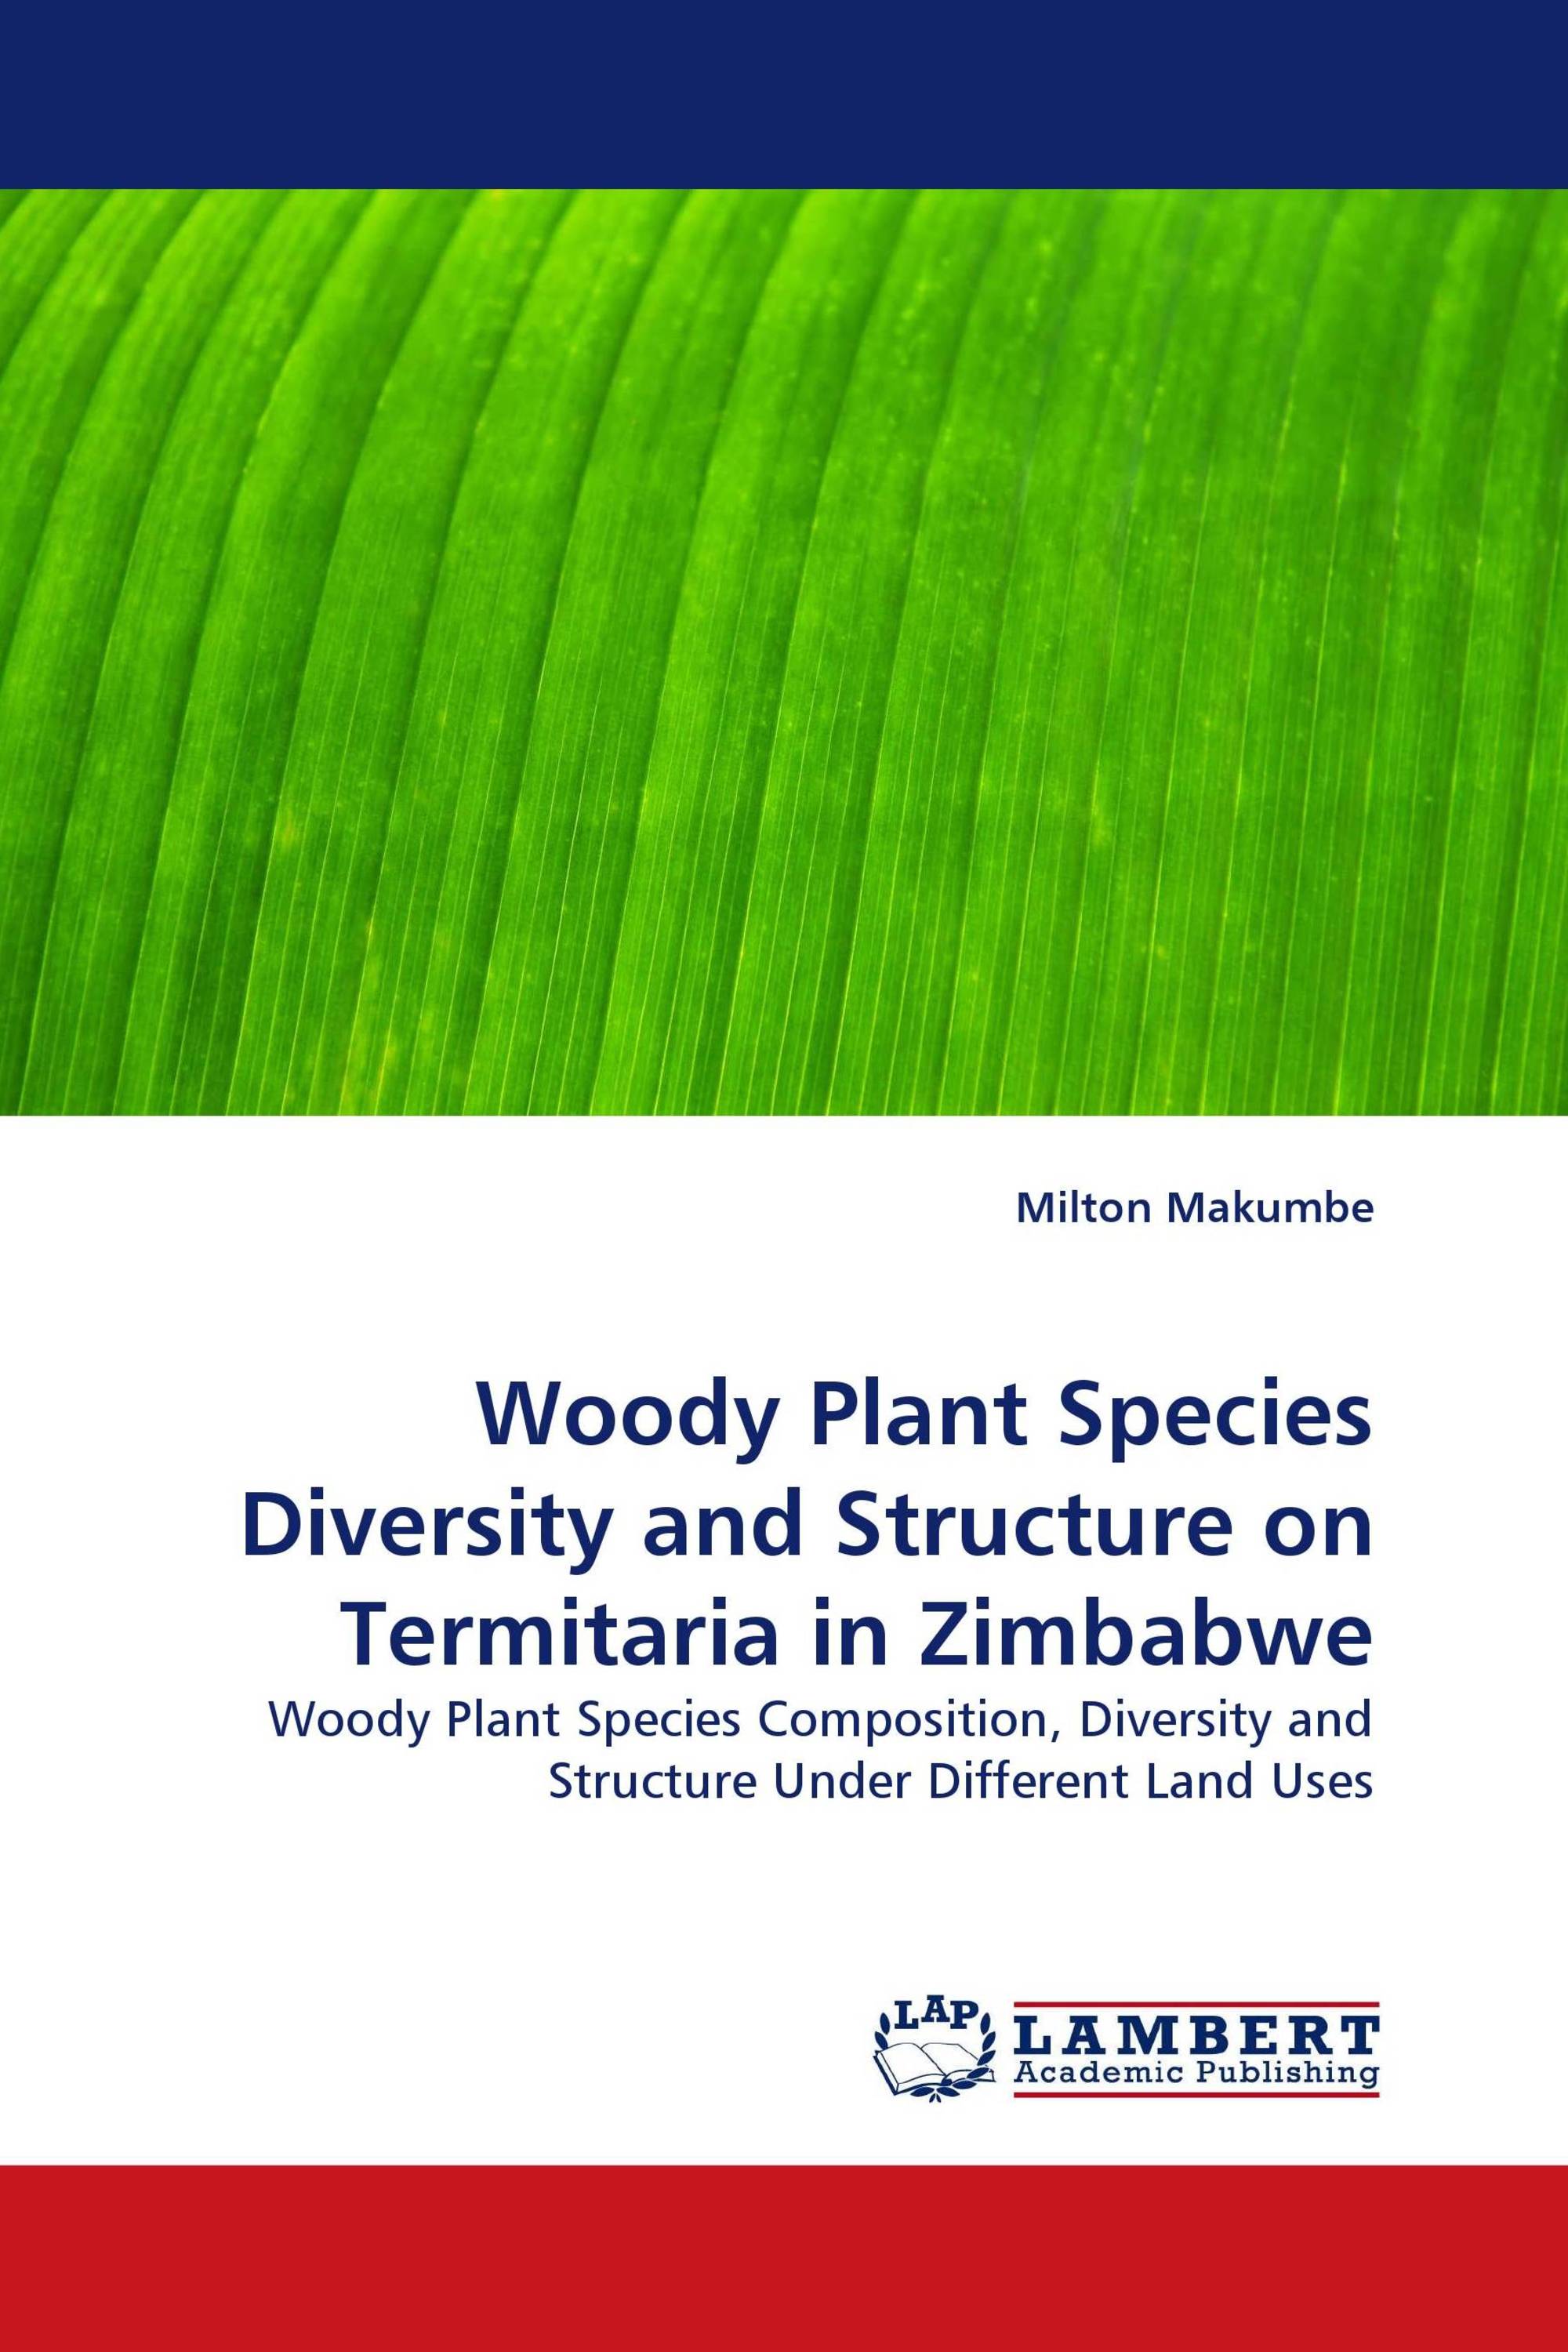 Woody Plant Species Diversity and Structure on Termitaria in Zimbabwe